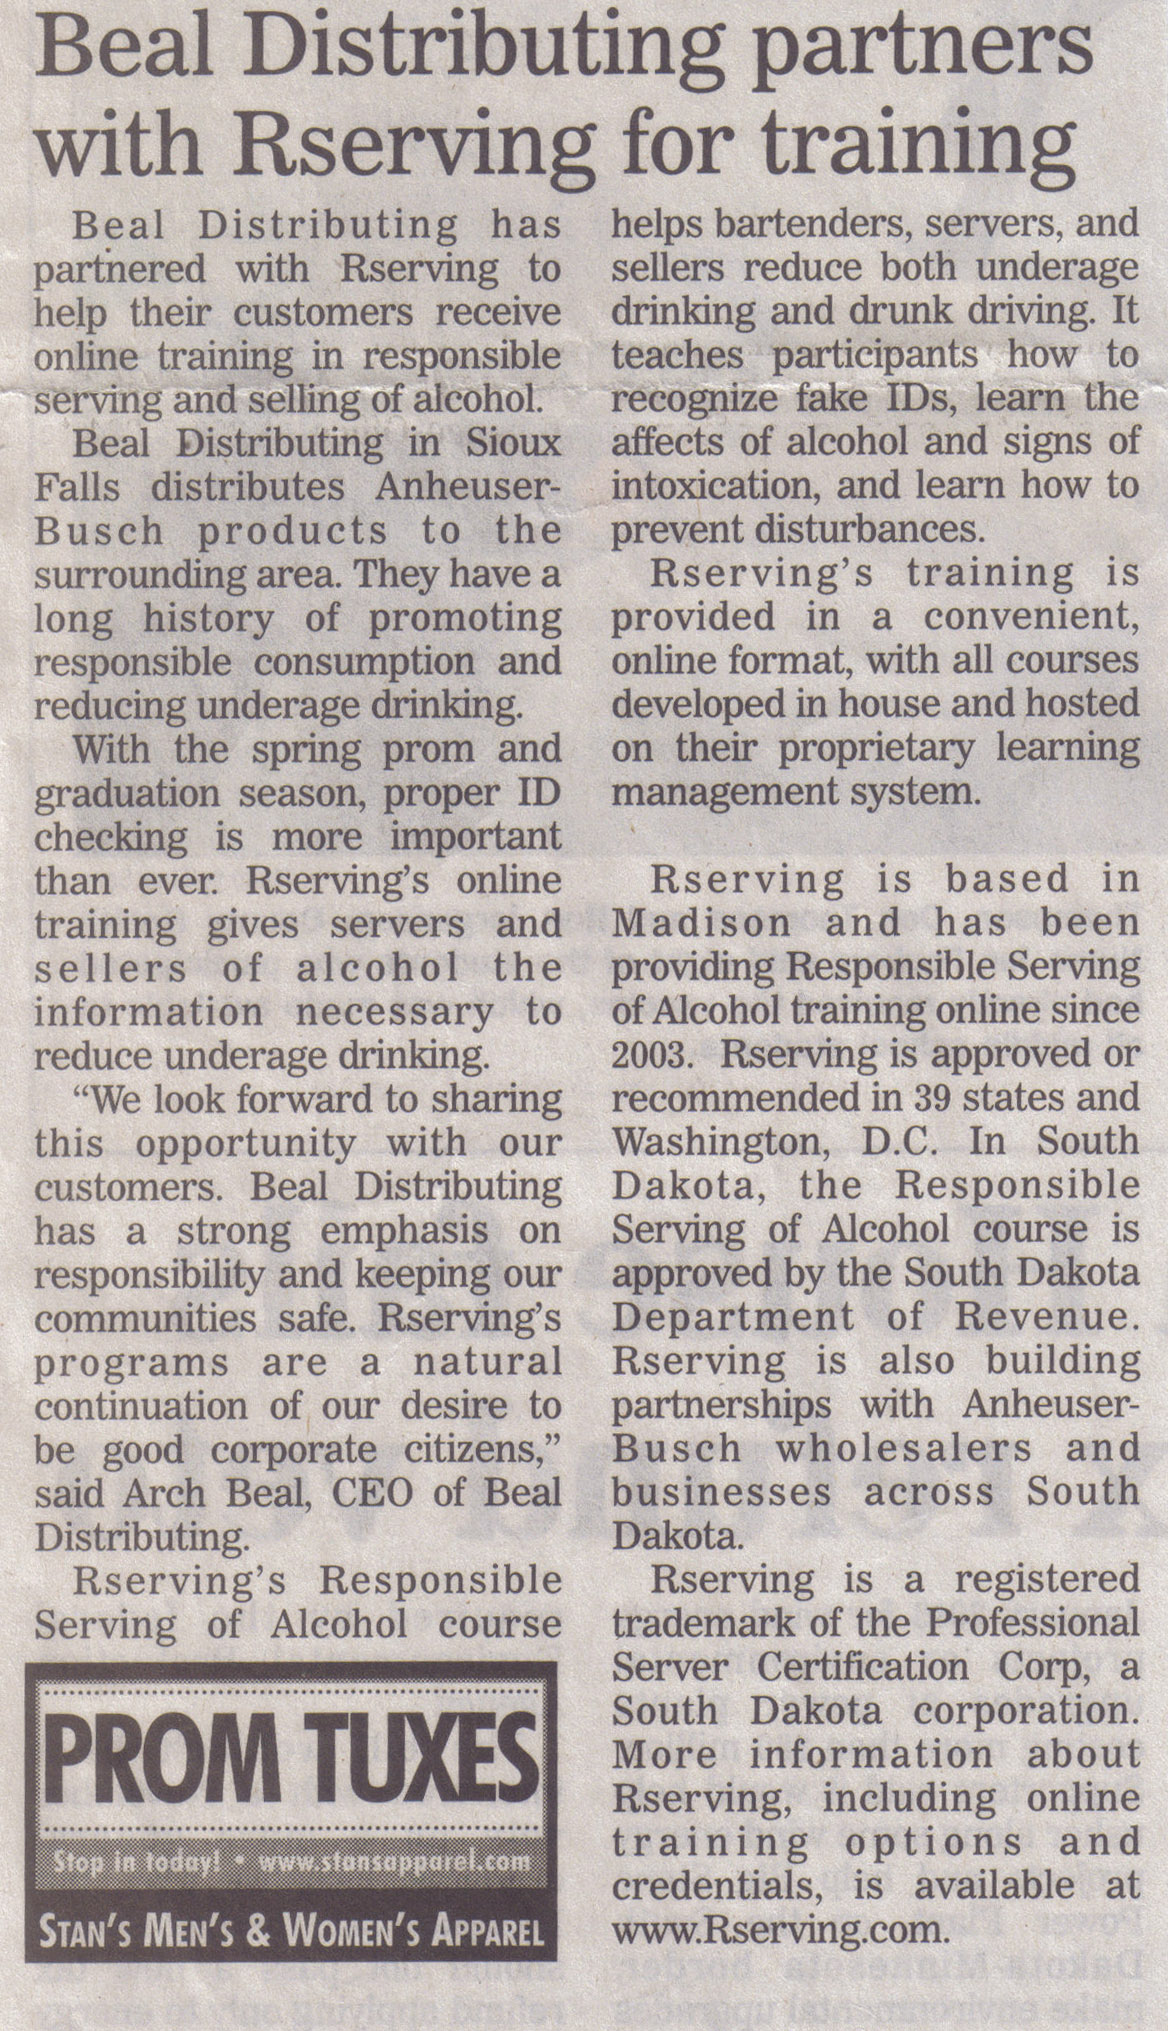 Press Release from the Madison Daily Leader about partnership between Rserving<sup>®</sup> and Anheuser-Busch wholesaler, Beal Distributing.